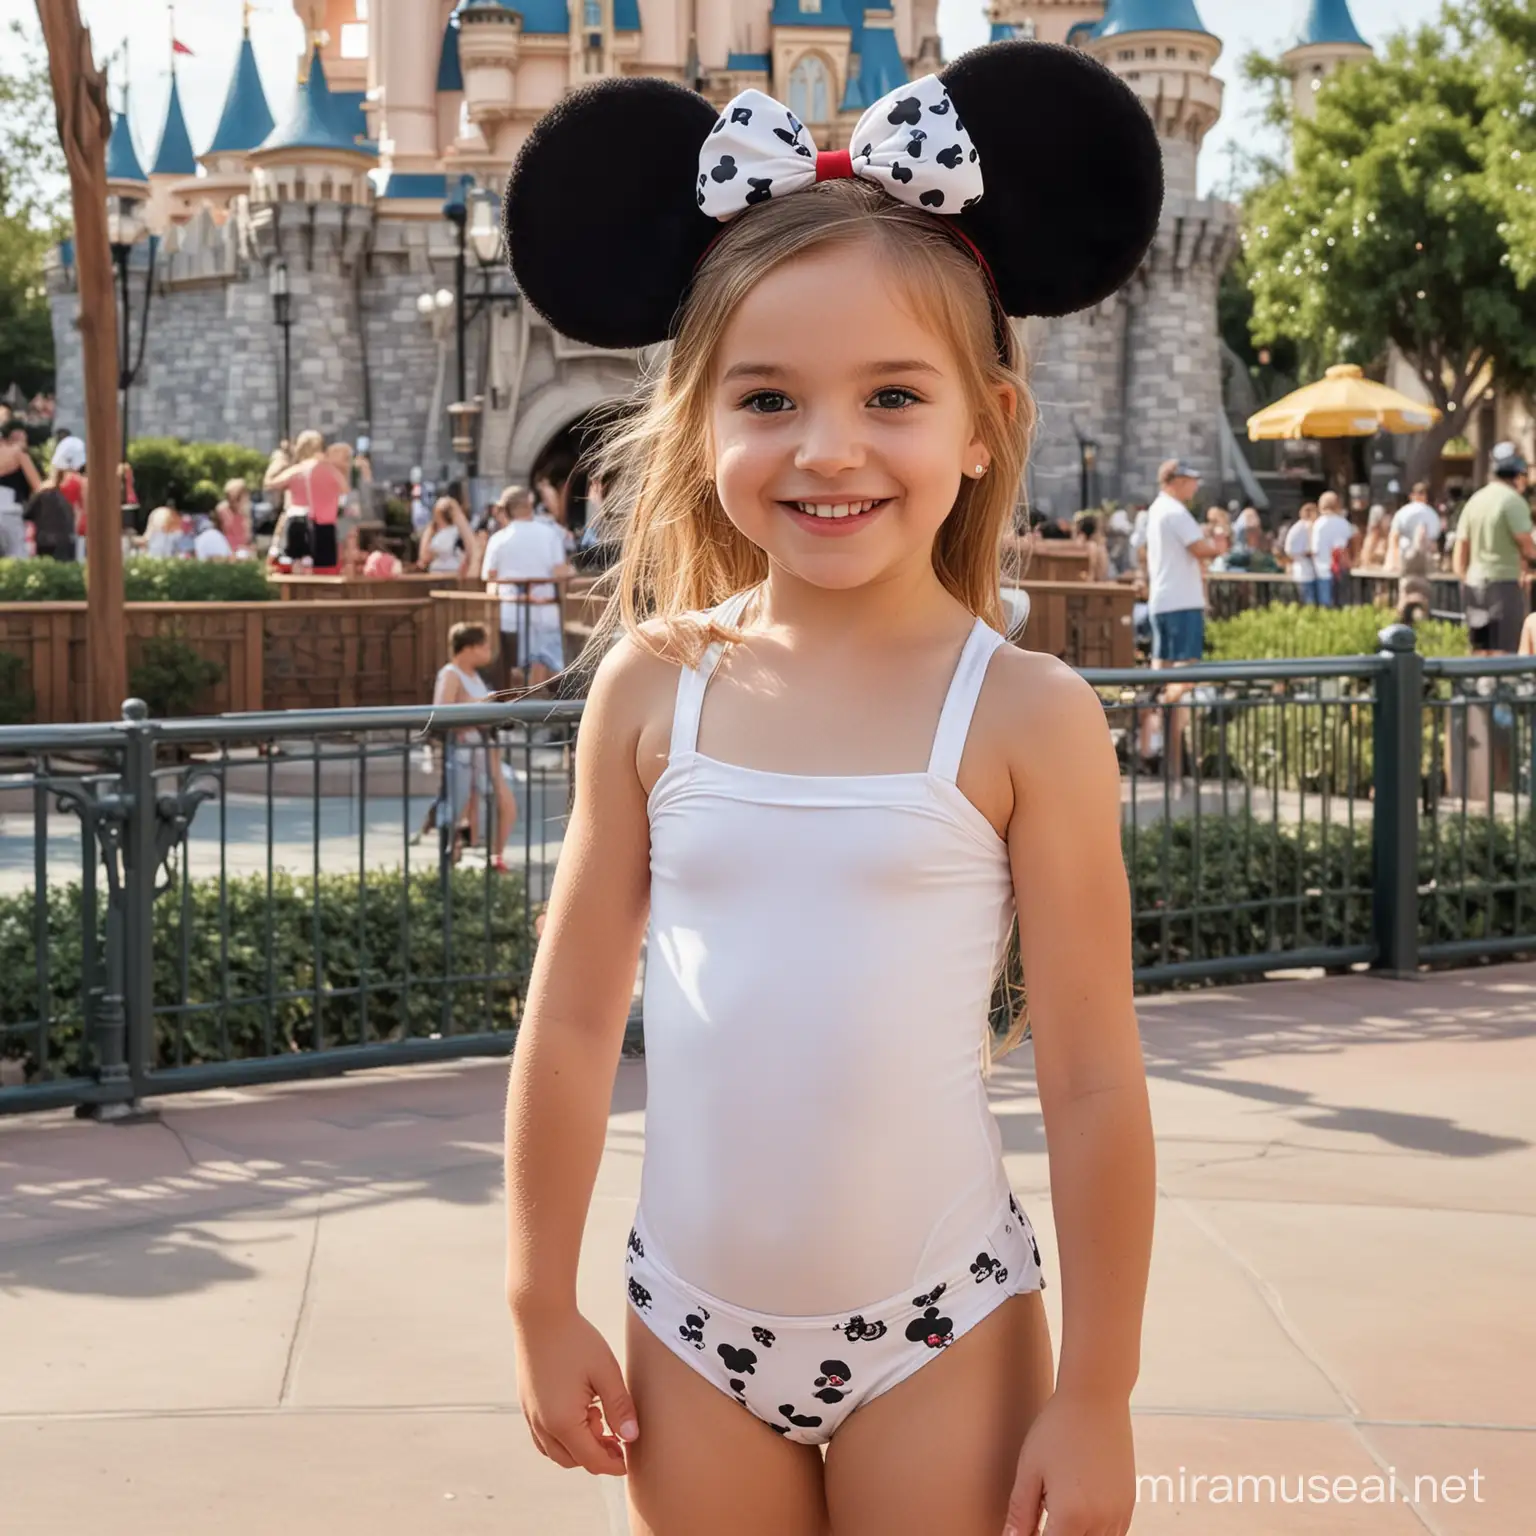 Young Girl in Mickey Mouse Ears Enjoys Disneyland Adventure